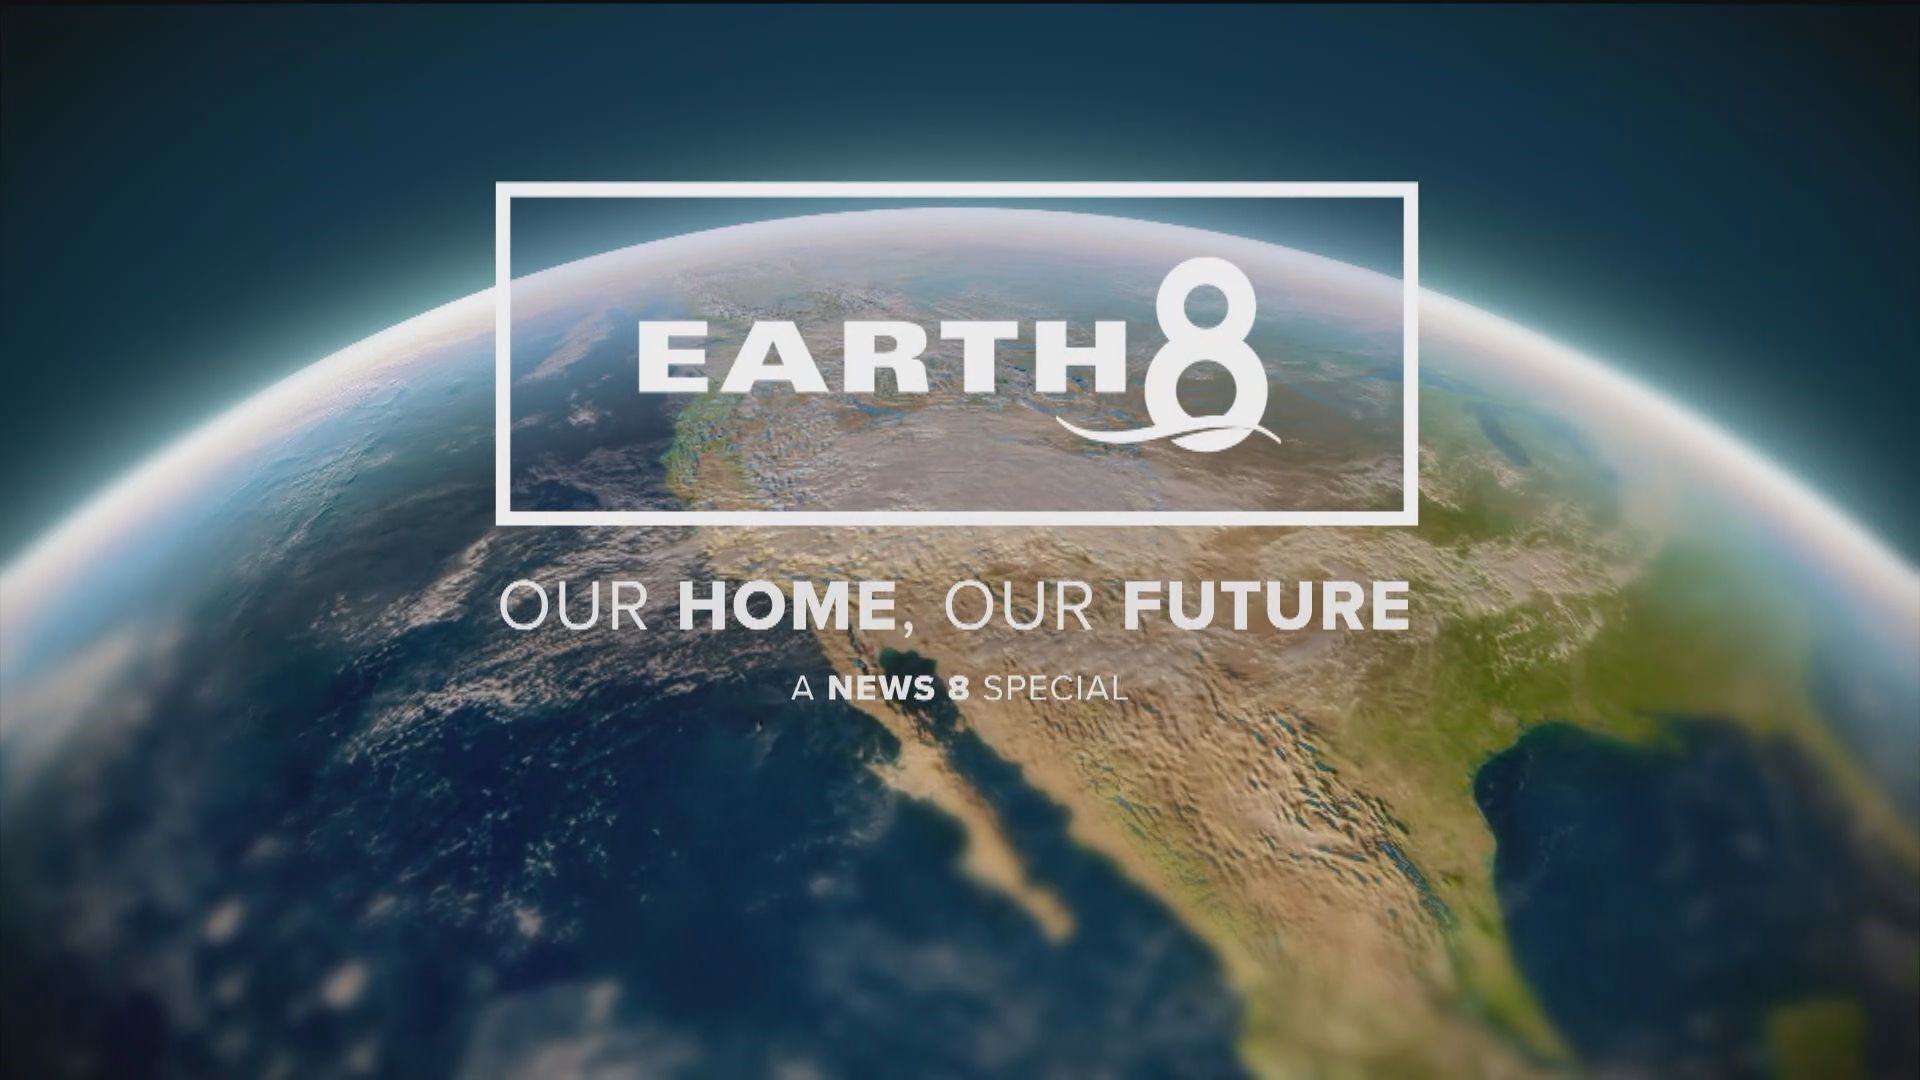 Earth 8 shows the issues that are affecting our planet and our community.